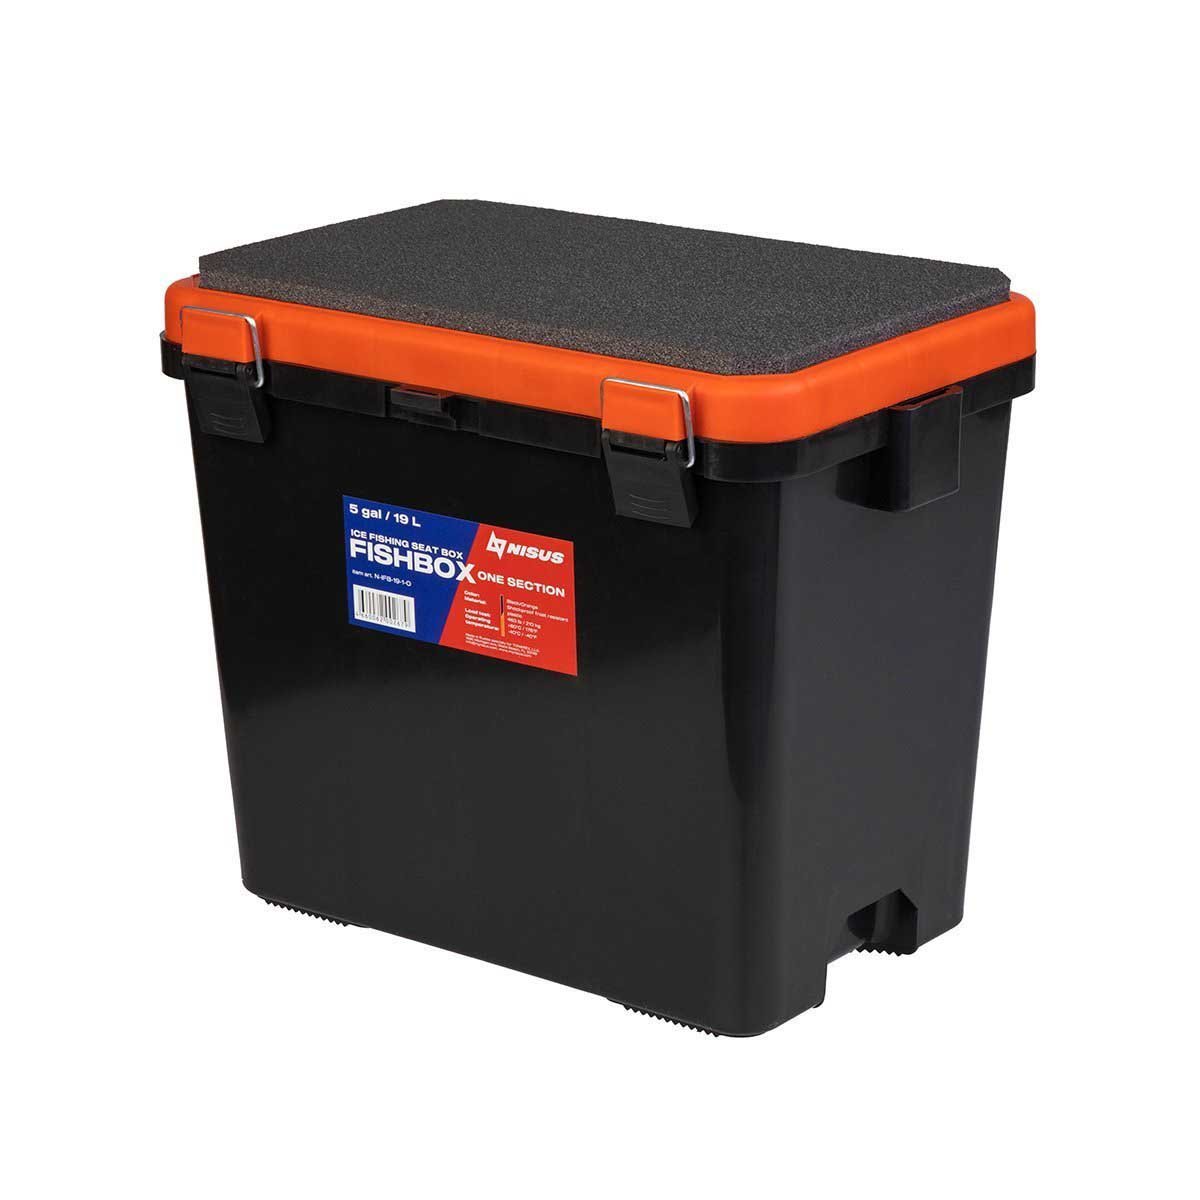 FishBox Large 5 gal SeatBox for Ice Fishing Tackle and Gear